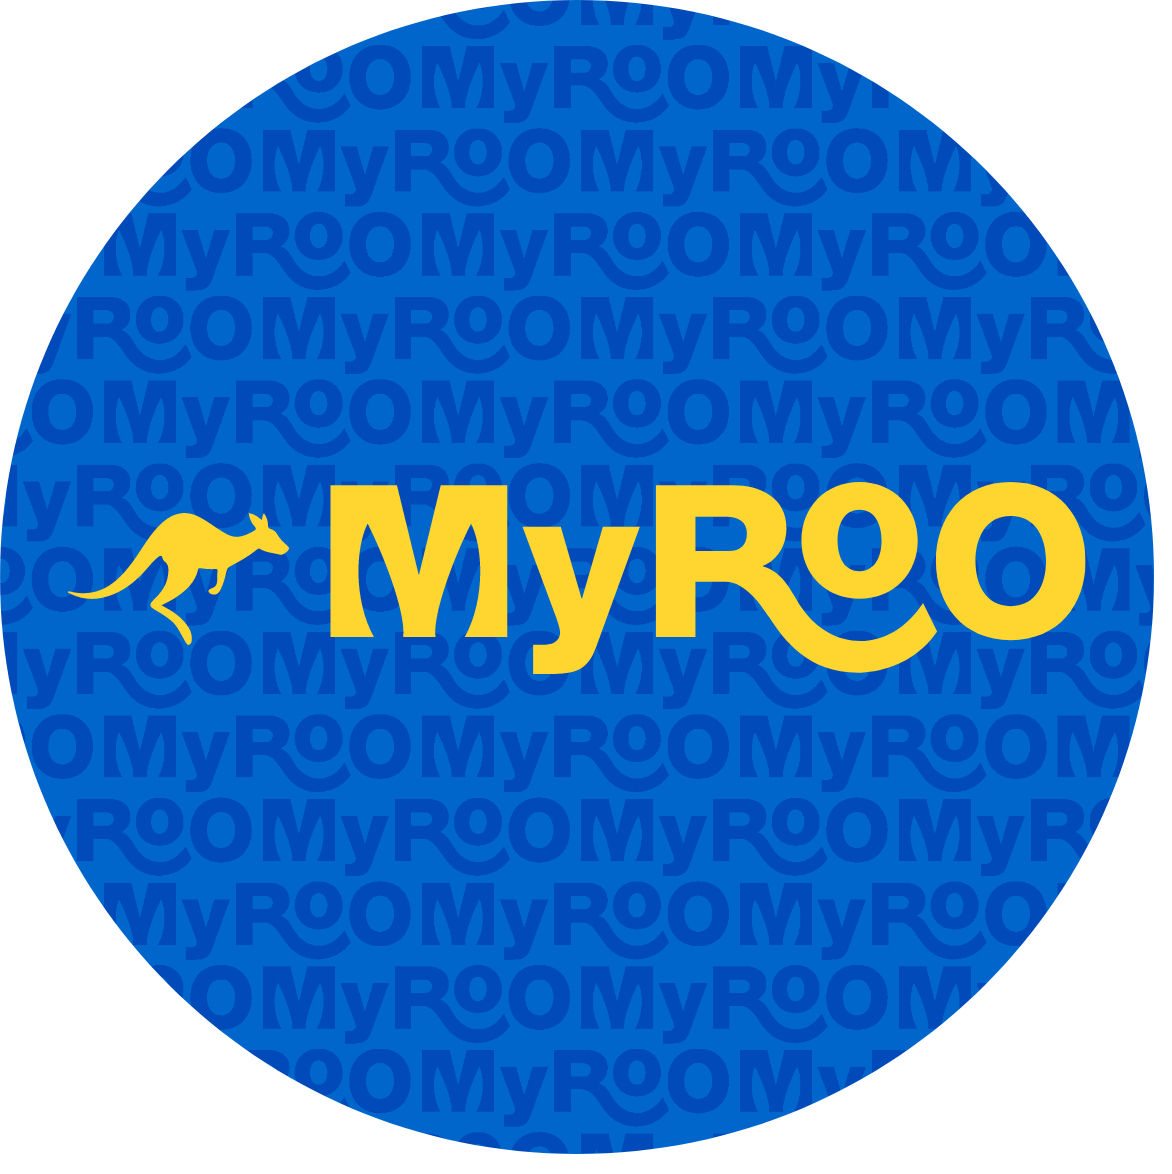 MyRoo logo in gold on a blue background with a small hopping gold kangaroo next to it